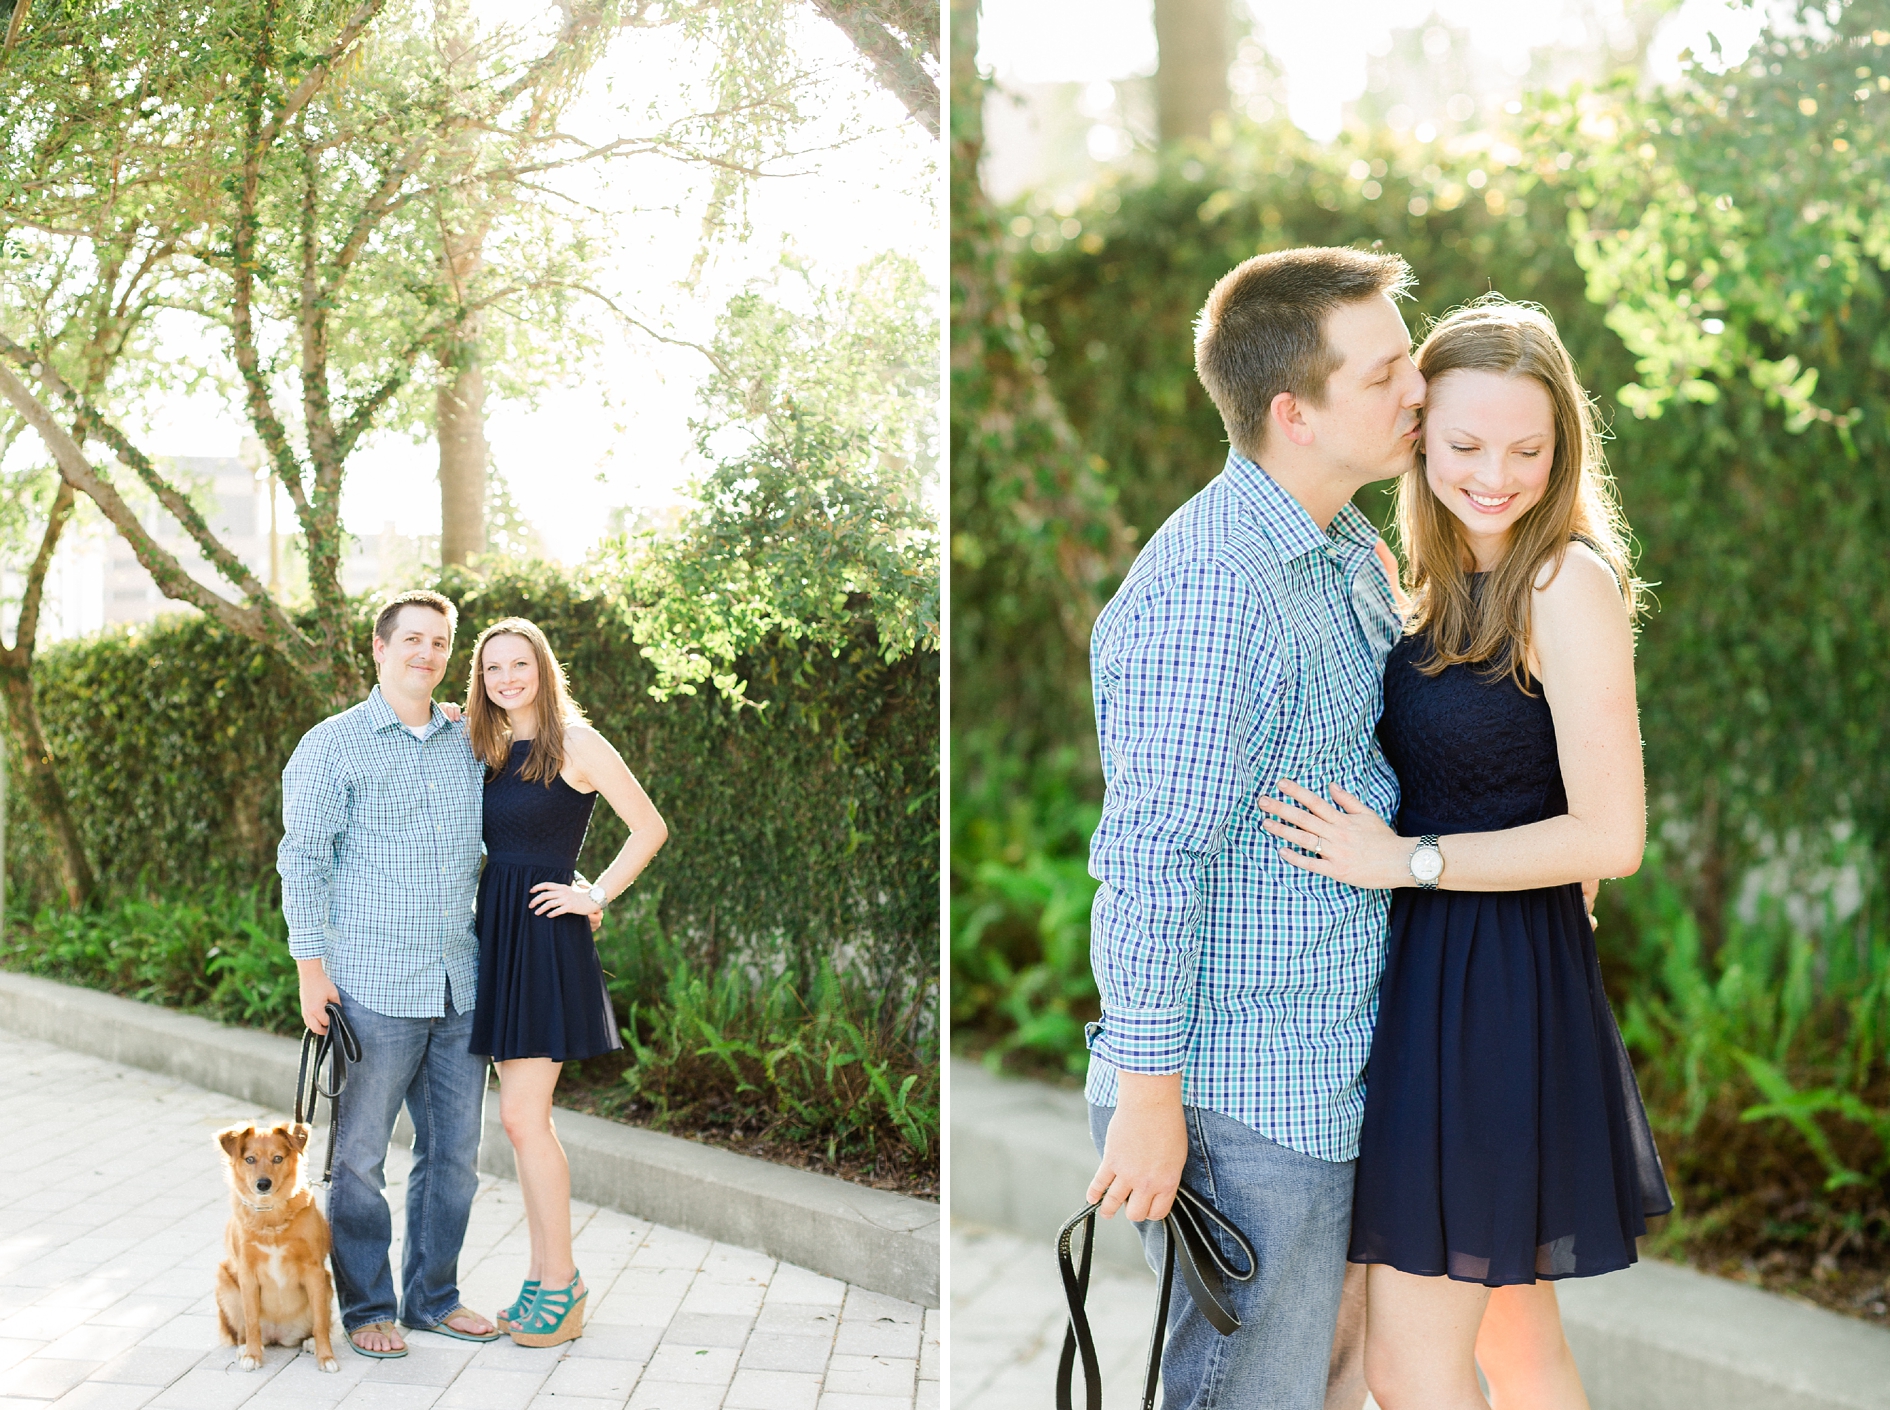 Harbor Island Engagement | © Ailyn La Torre Photography 2016